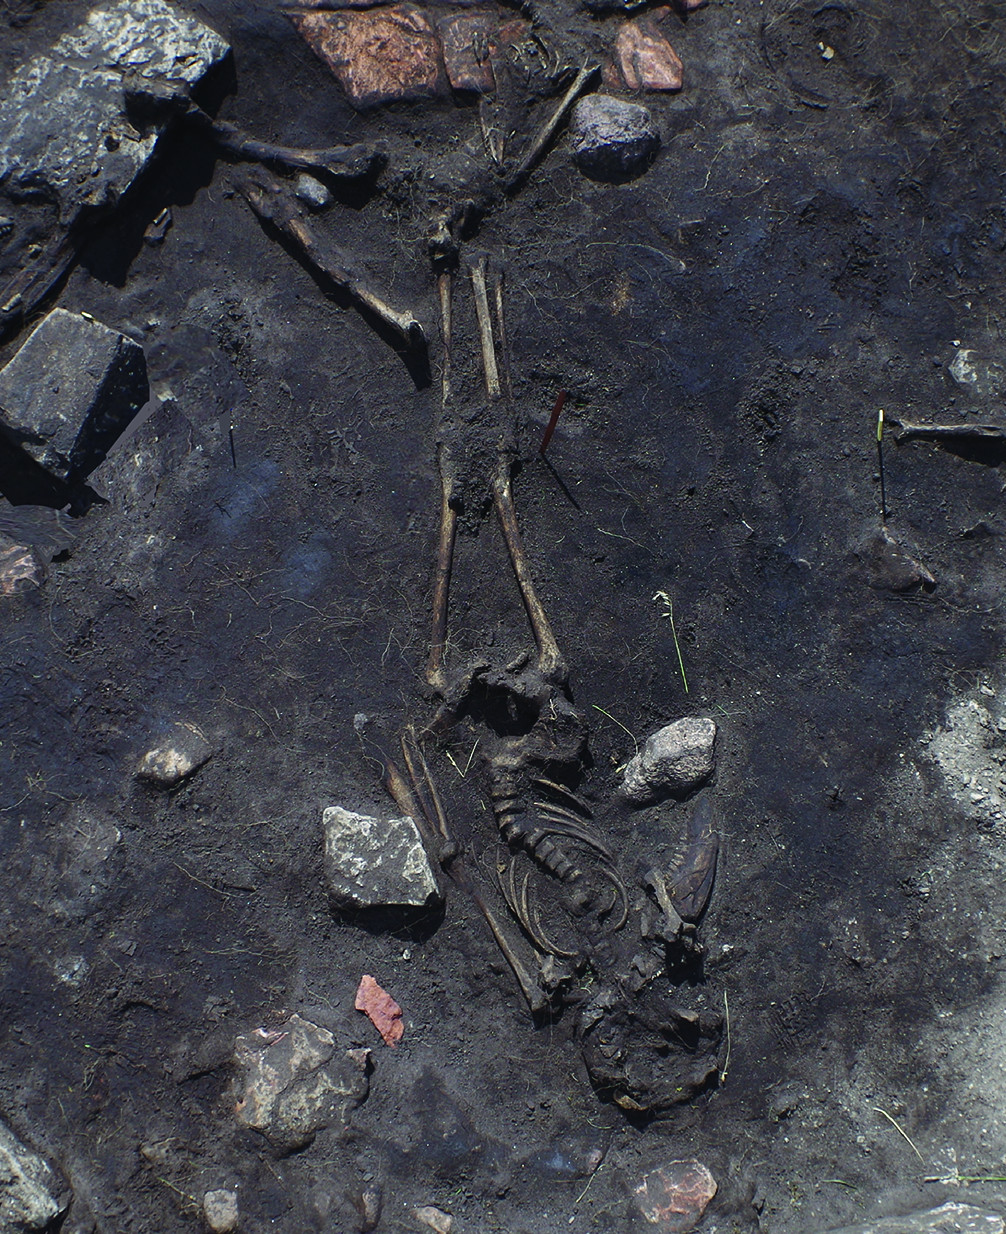 This Recently Discovered Fifth-Century Massacre In Sweden Is So Game Of Thrones We Can’t Even Handle It